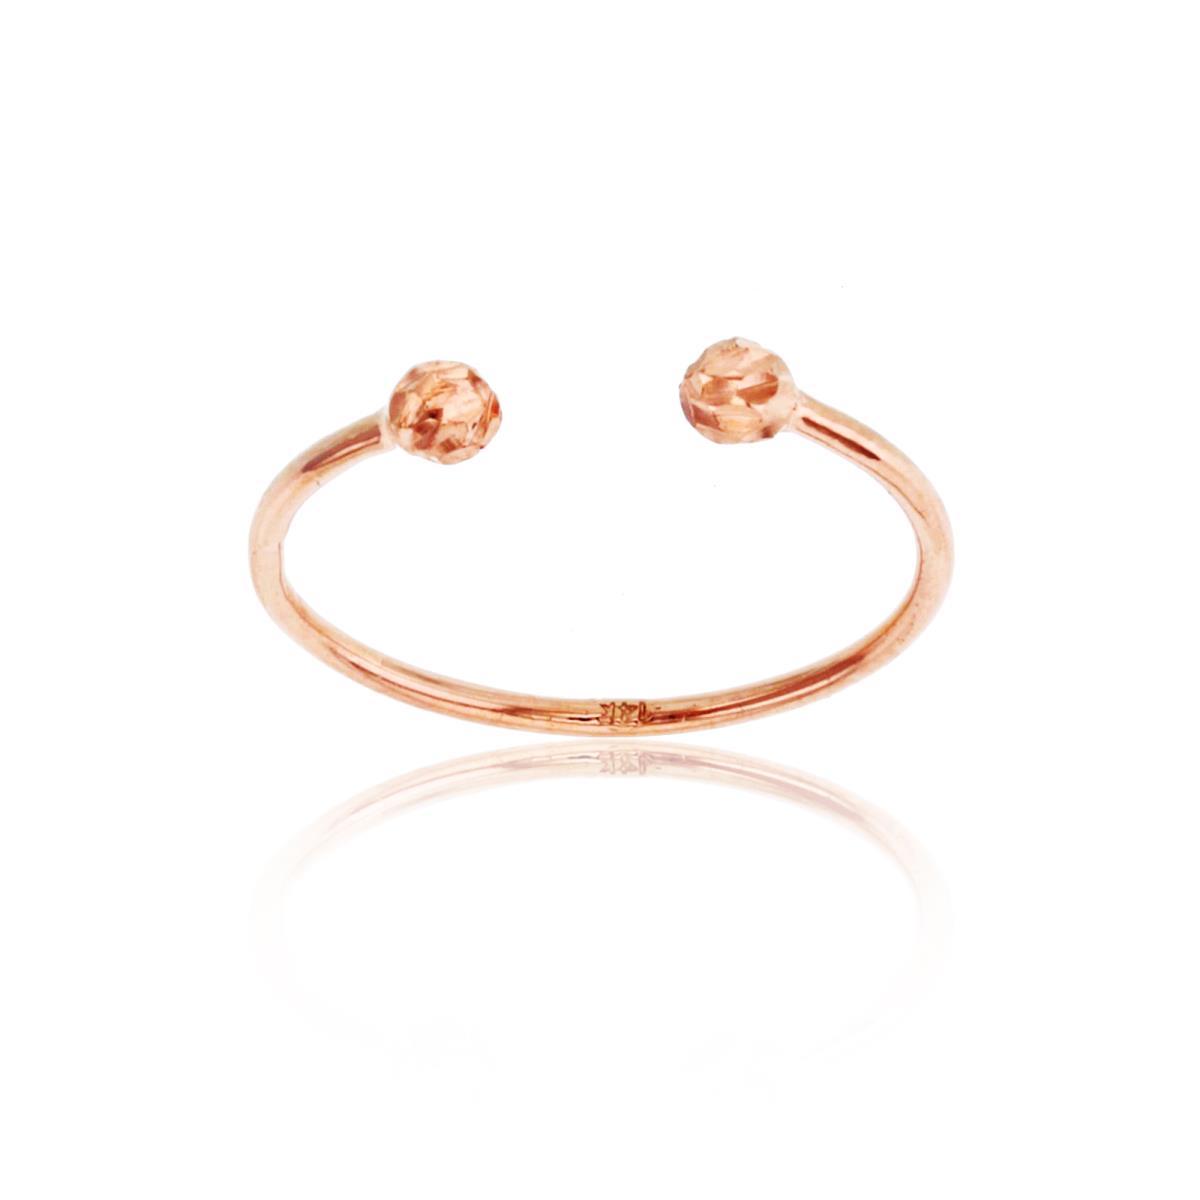 14K Rose Gold 3mm DC Beads on Adjustable Wire Ring